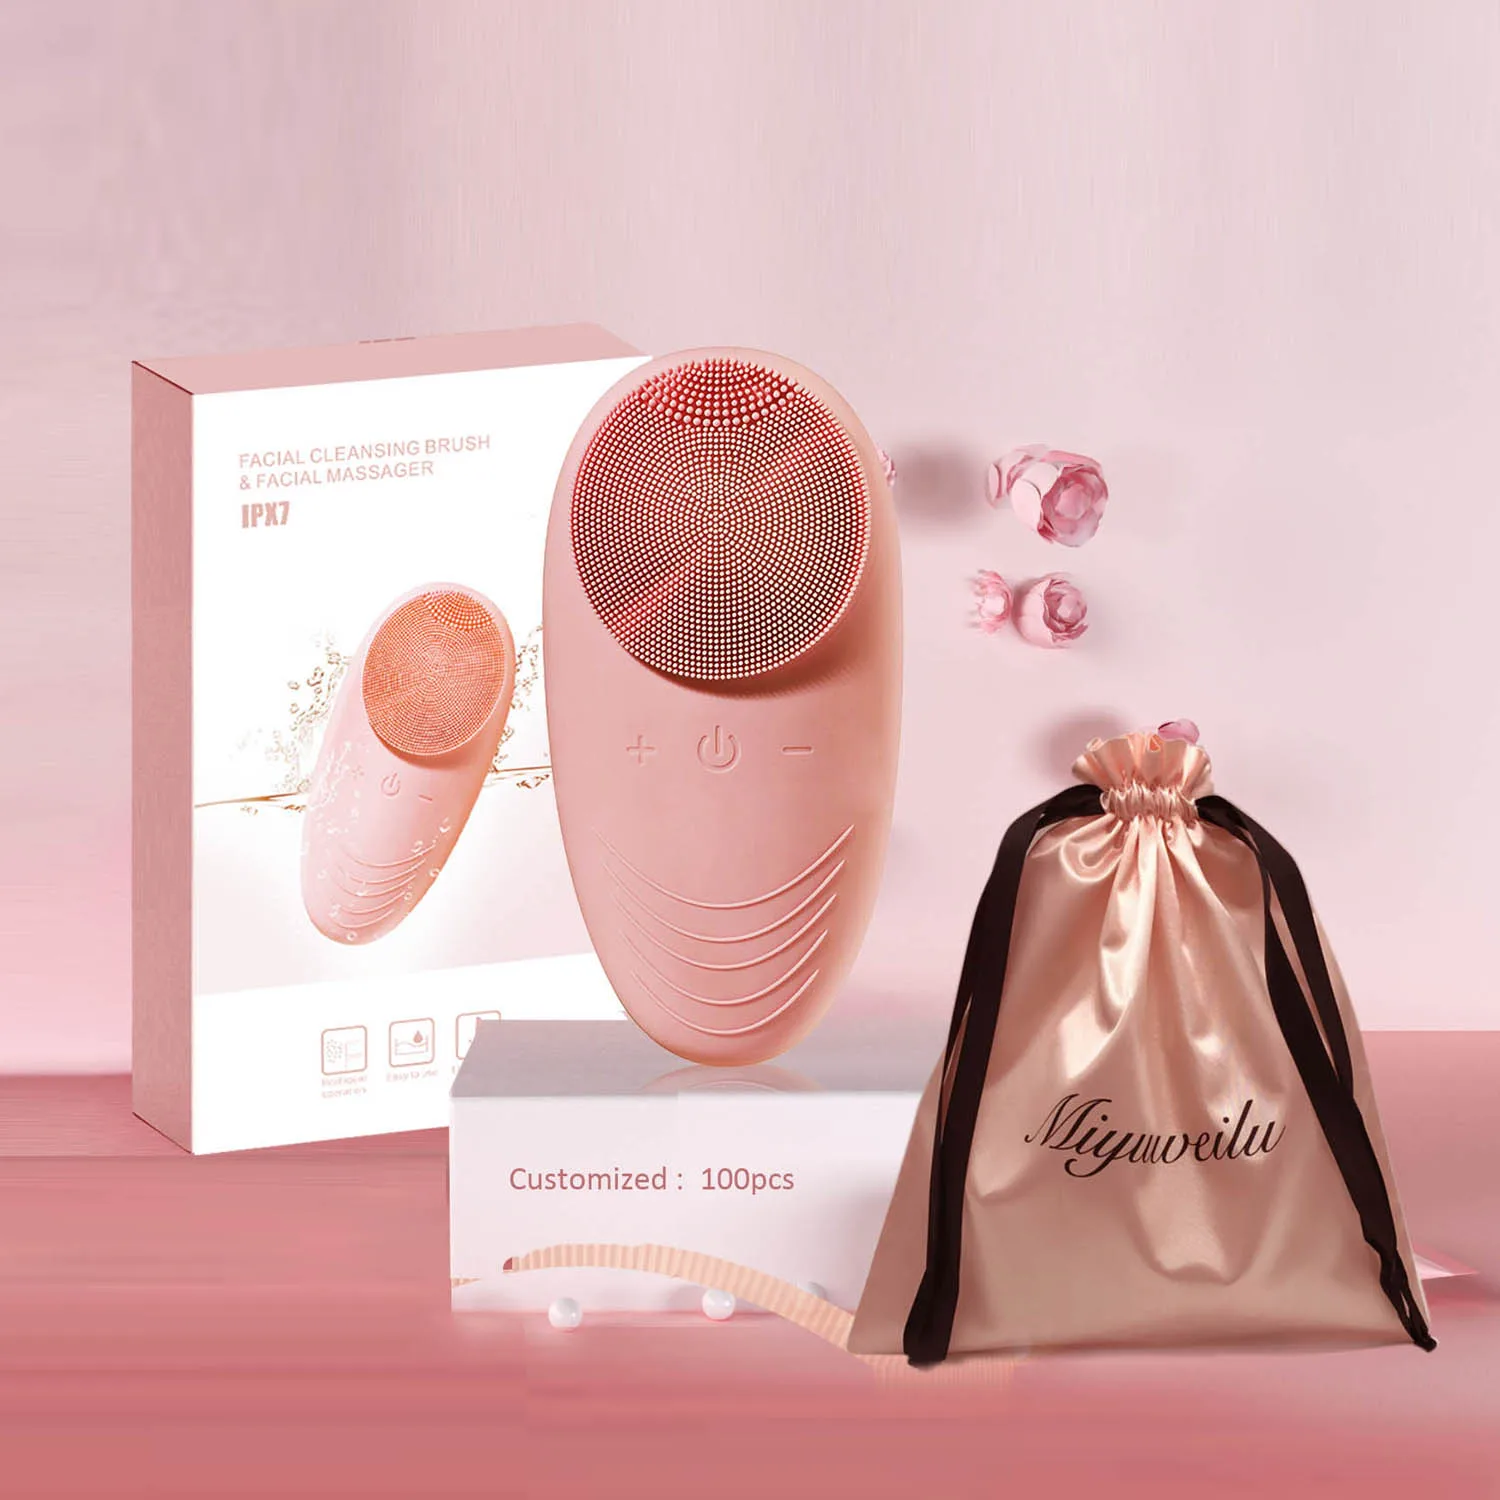 

Facial Cleansing Brush Waterproof Sonic High Frequency Vibrating Face Brush for Deep Cleansing, Gentle Exfoliating and Massaging